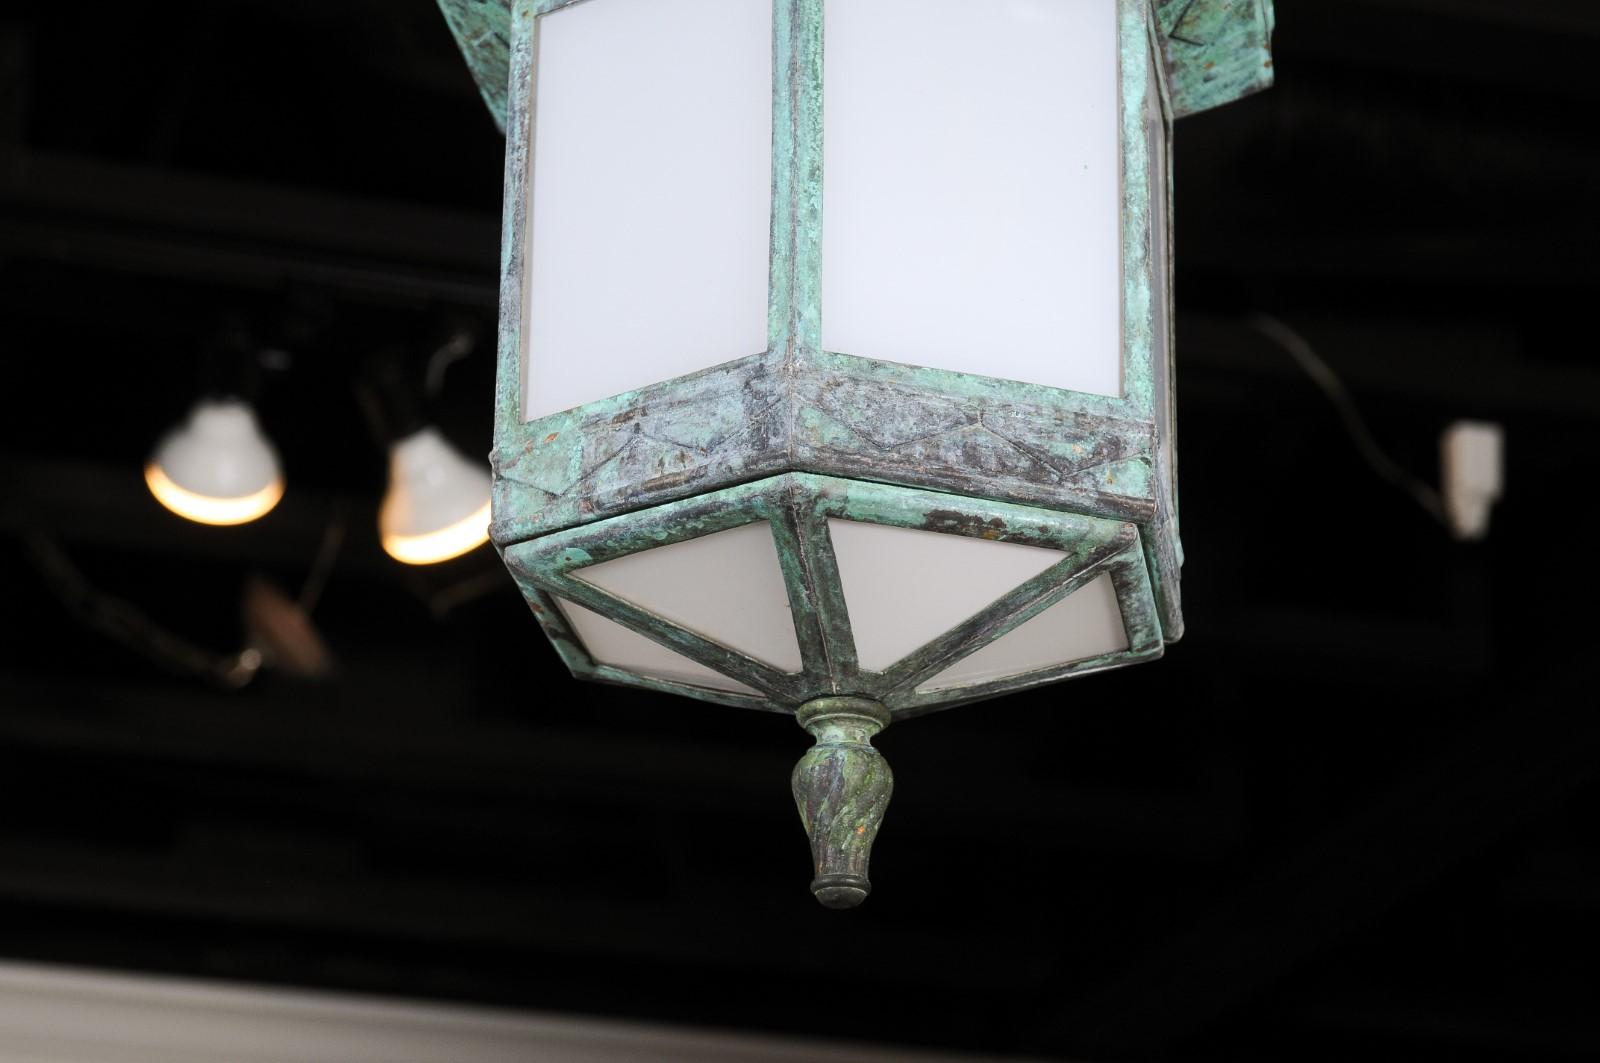 French 1910s Art Deco Hexagonal Lantern with Milk Glass and Verdigris Patina In Good Condition For Sale In Atlanta, GA